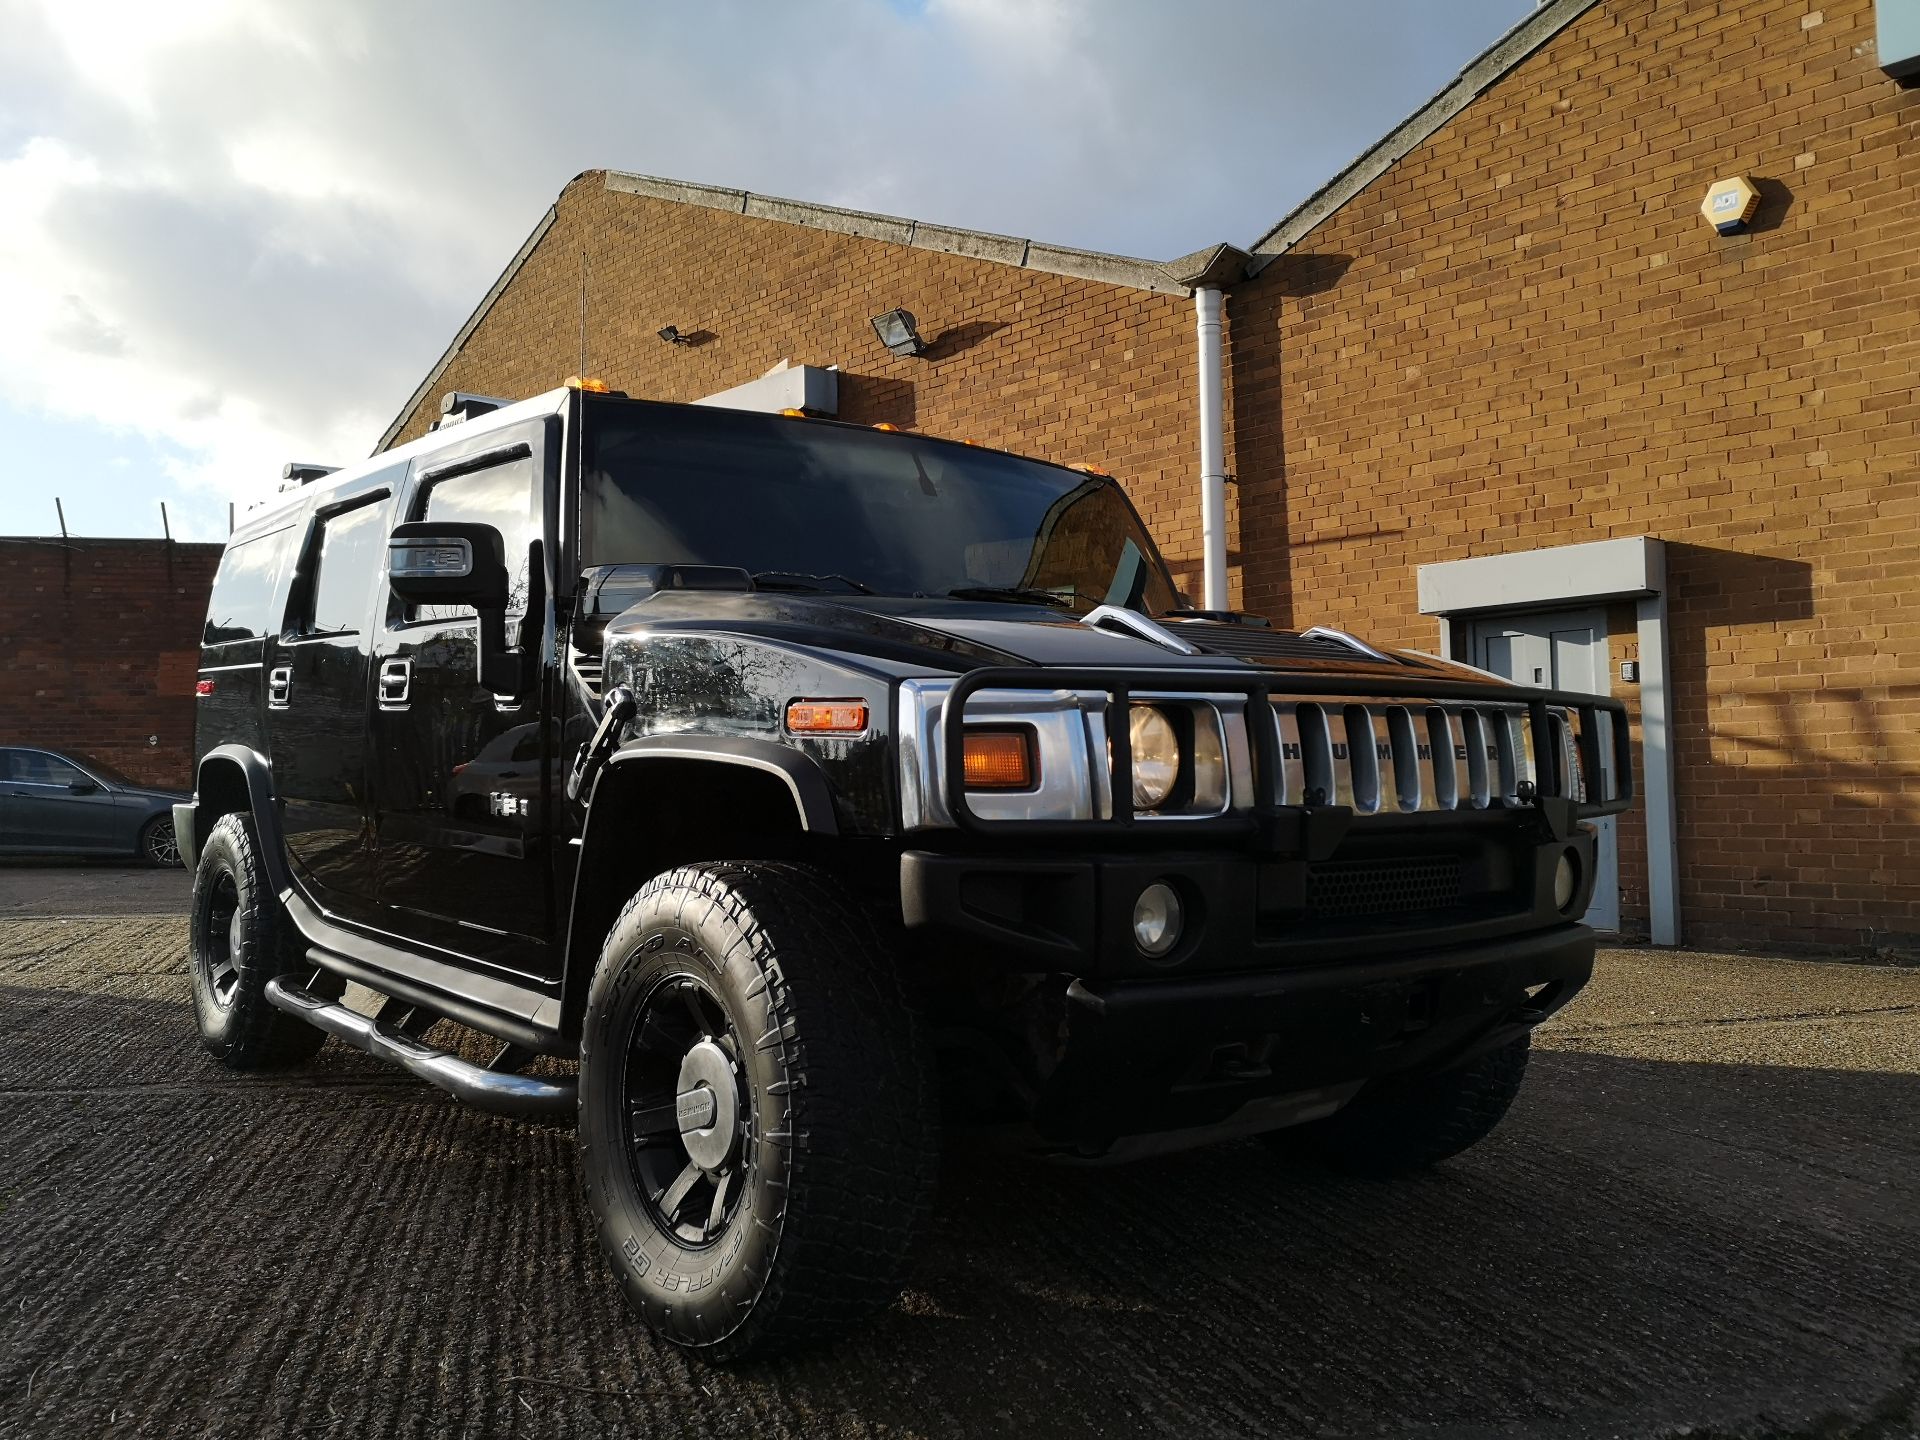 Scare the Neighbour’s in this Black Hummer H2, 2006 4 x 4 (no vat)